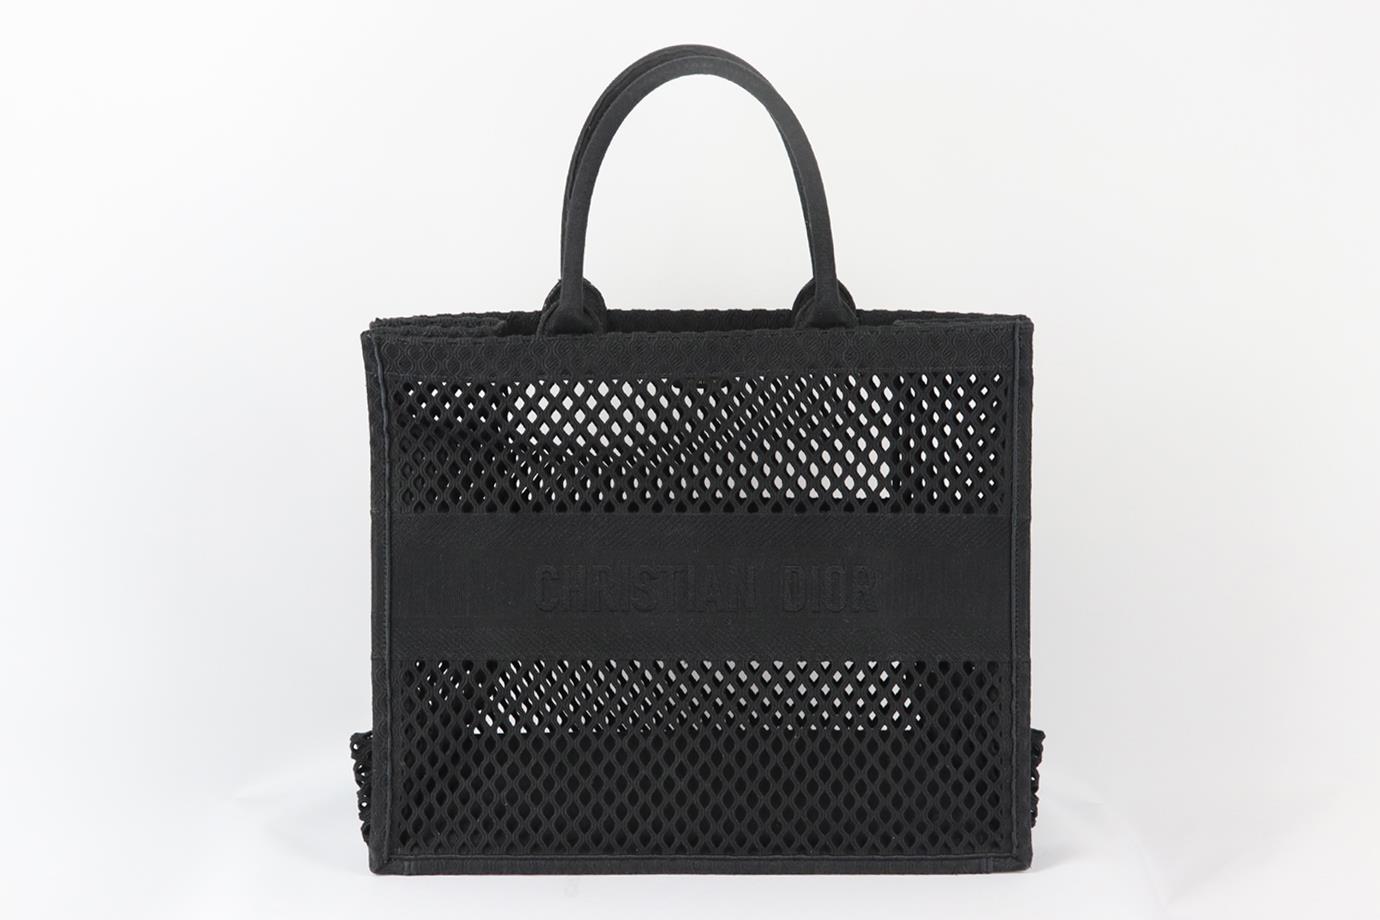 Christian Dior 2020 Book large jacquard cutout canvas tote bag. Made from black cutout canvas design with the brand's iconic logo on the front, it opens to a large internal compartment. Black. Open top. Does not come with dustbag or box. Width: 16.5